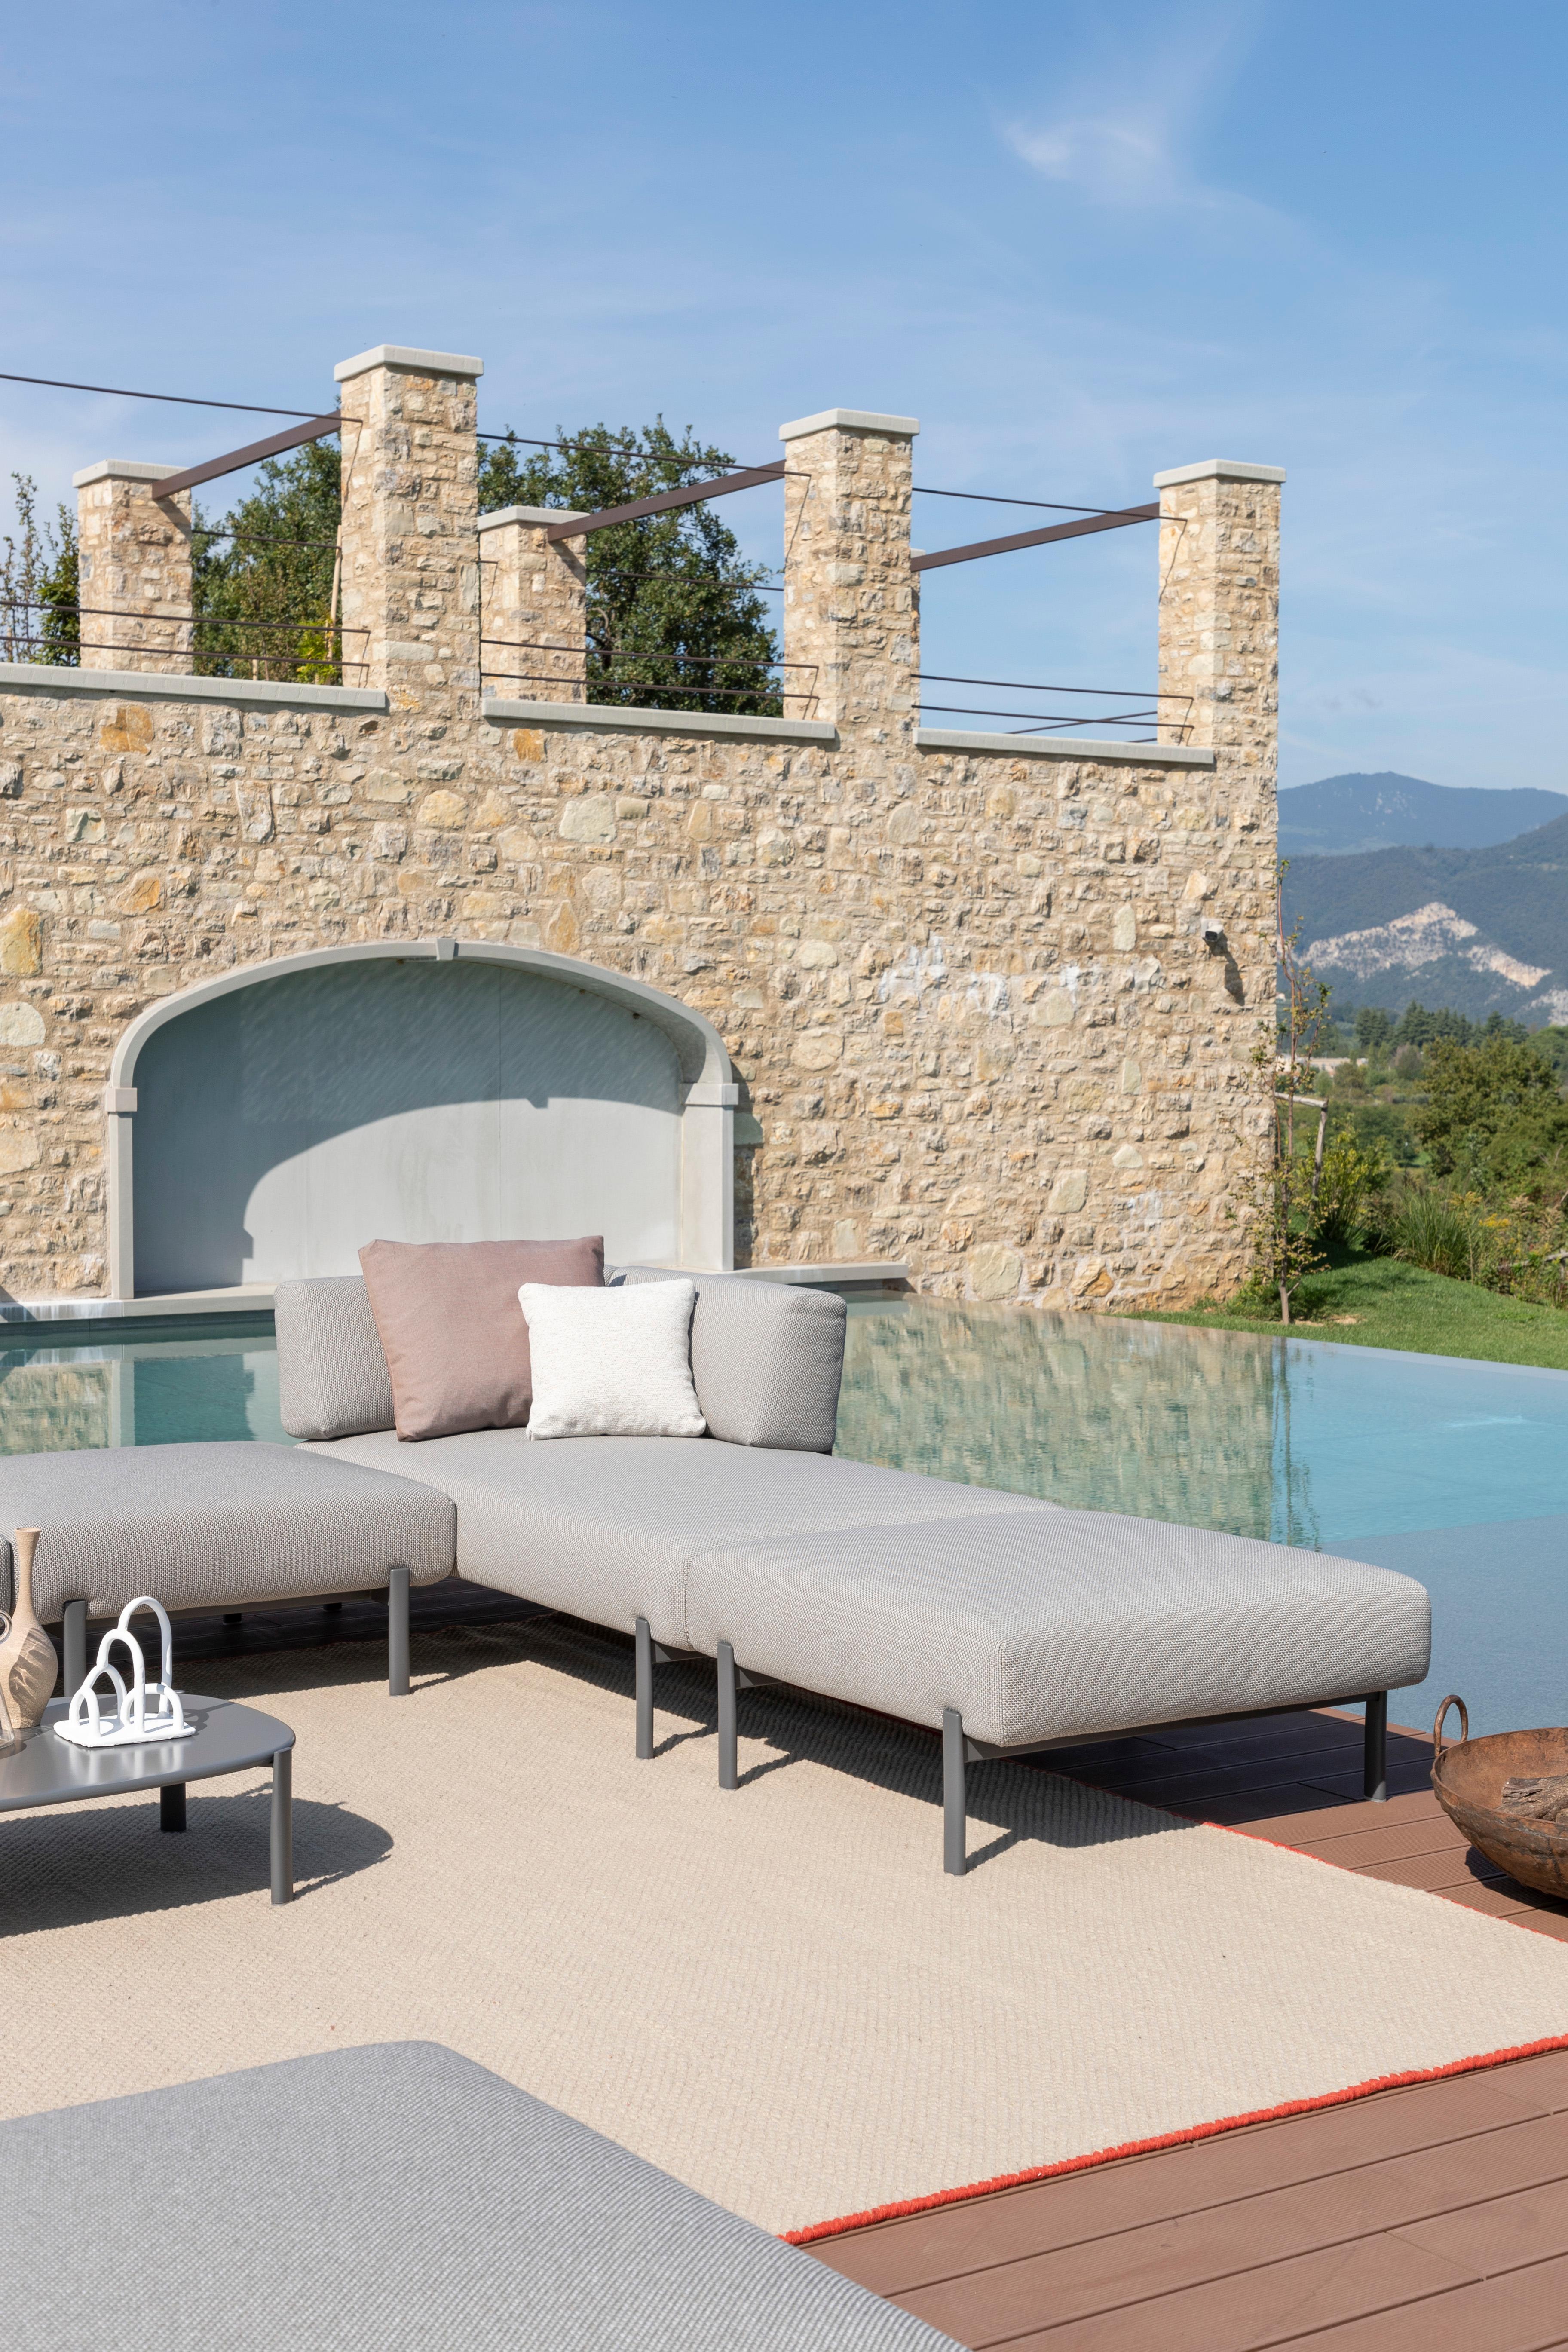 Alias T04+T06 Ten Outdoor Sofa Set in White with Sand Lacquered Aluminum Frame by PearsonLloyd

Modular central element for outdoor use with lacquered die-cast aluminium legs and stainless steel frame.Seat and back with removable cover in fabric or